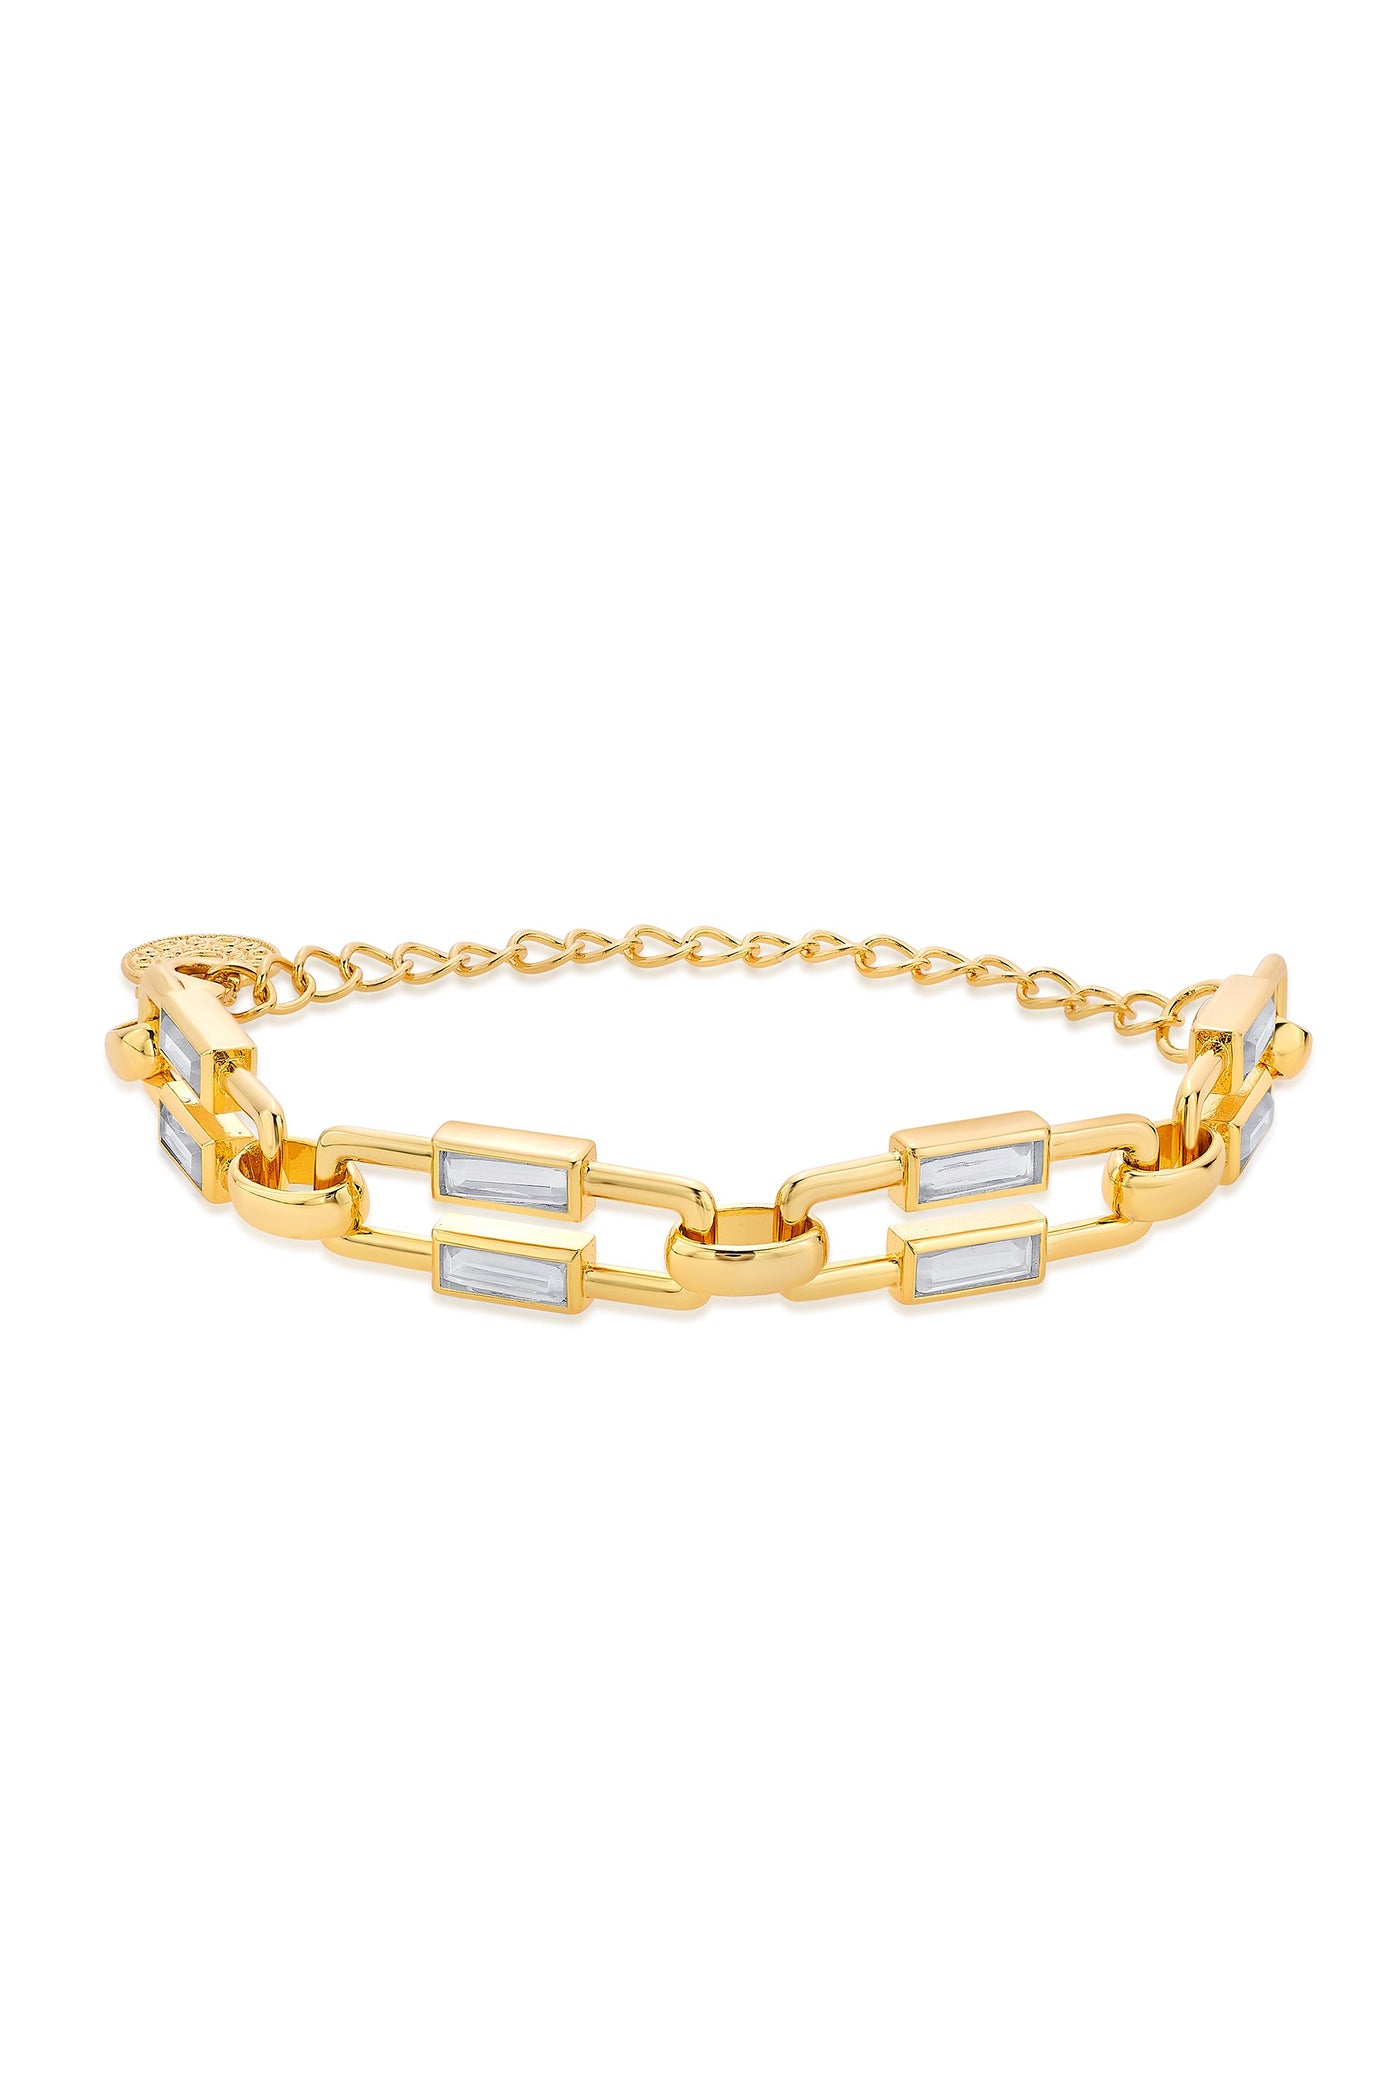 Mirrors on the Move 2.0 Chain Link Bracelet